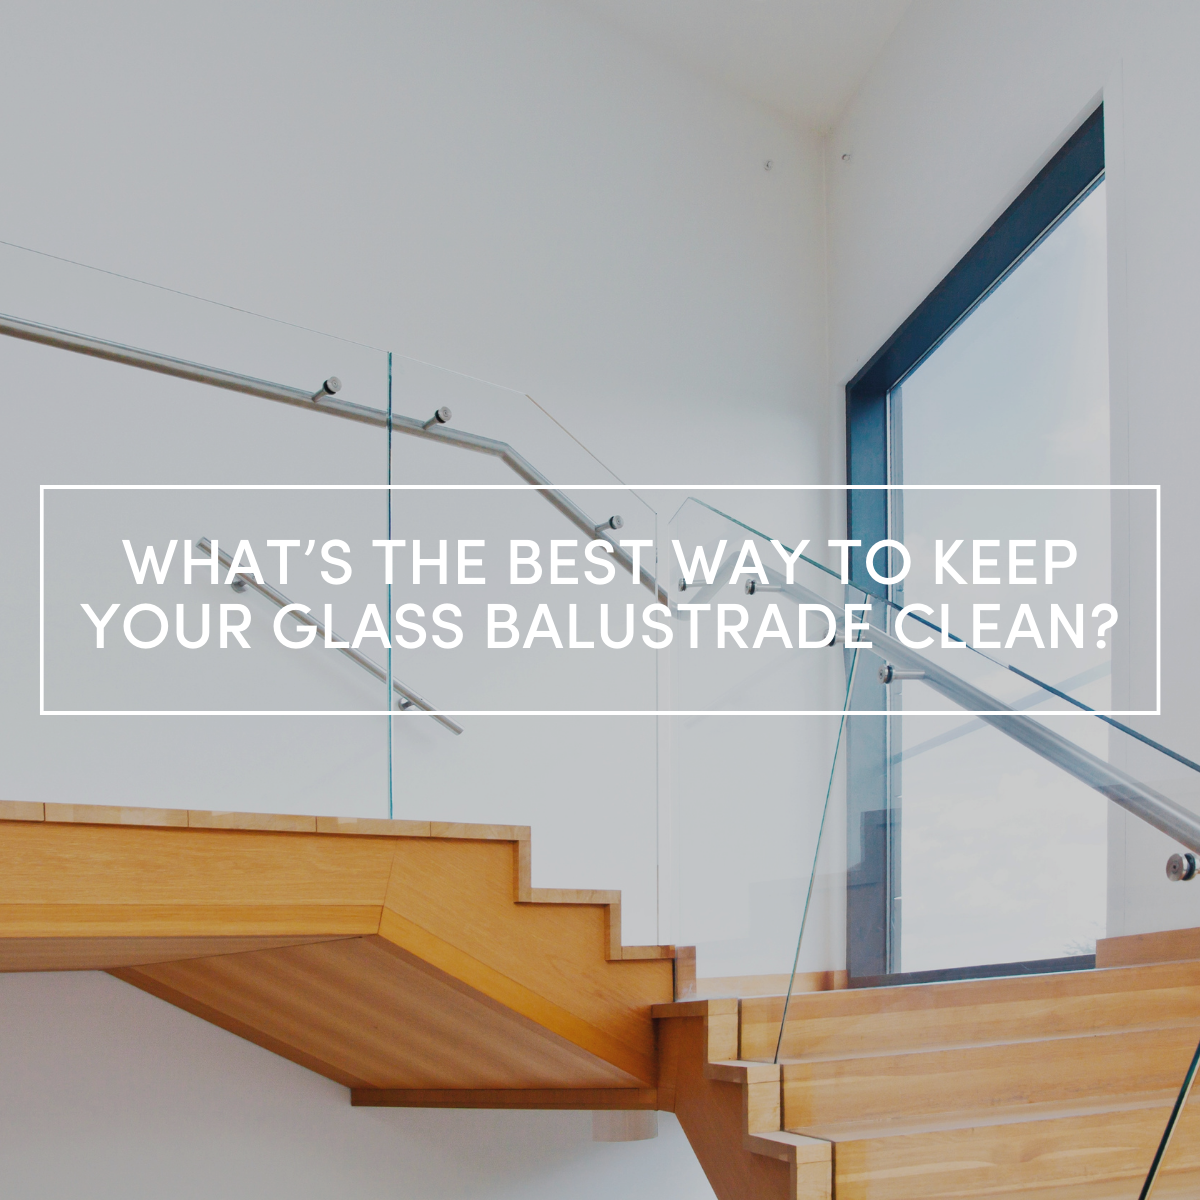 What's the best way to clean glass balustrades?